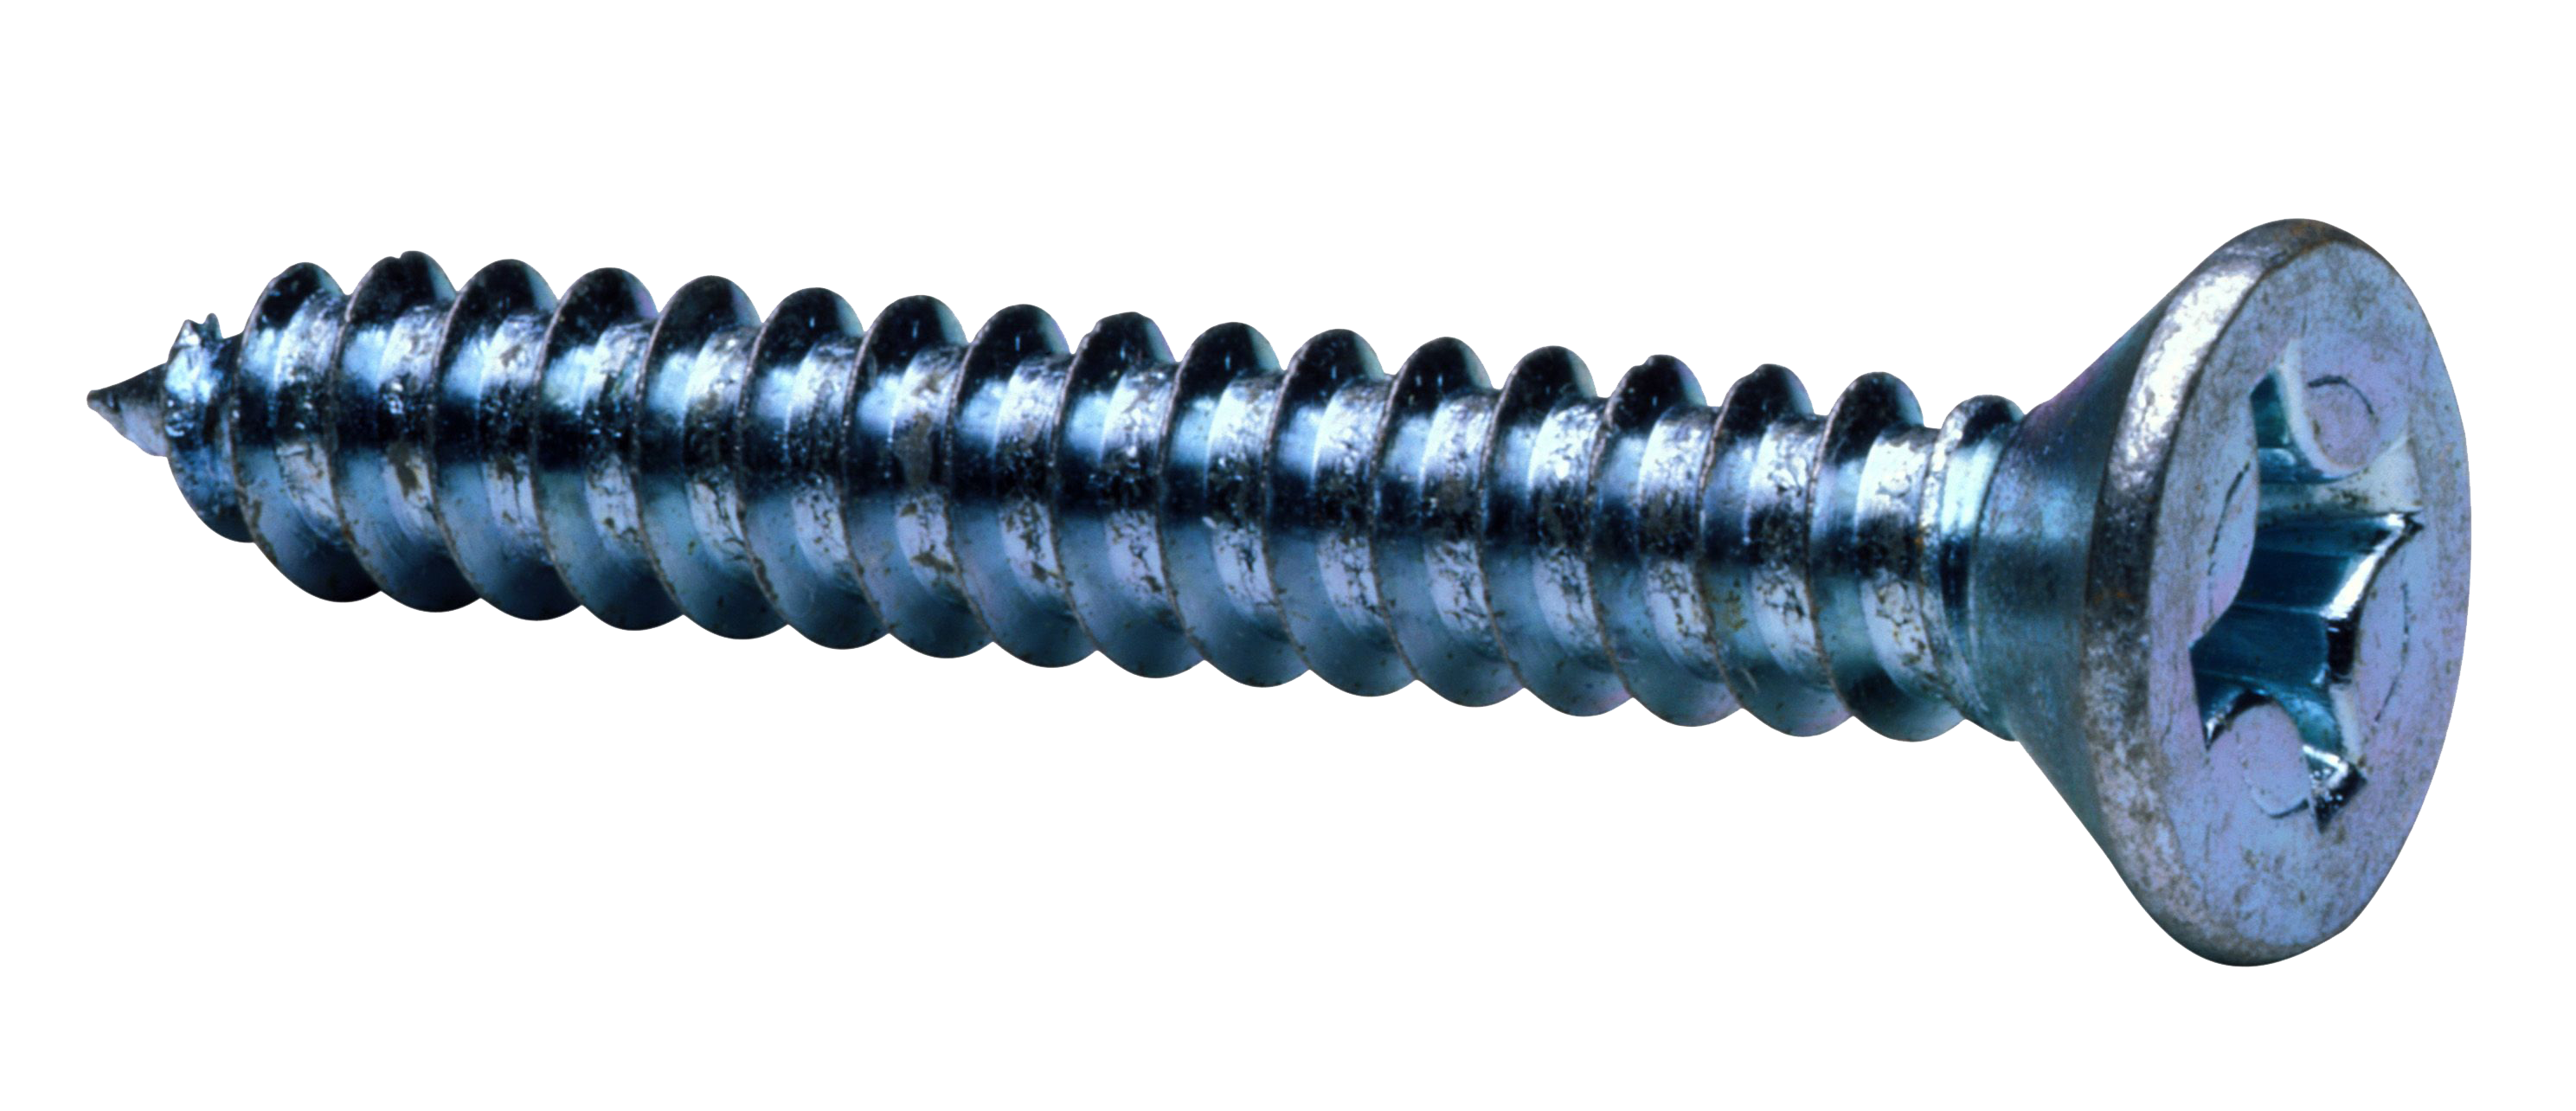 Screw Png Image - Screw, Transparent background PNG HD thumbnail